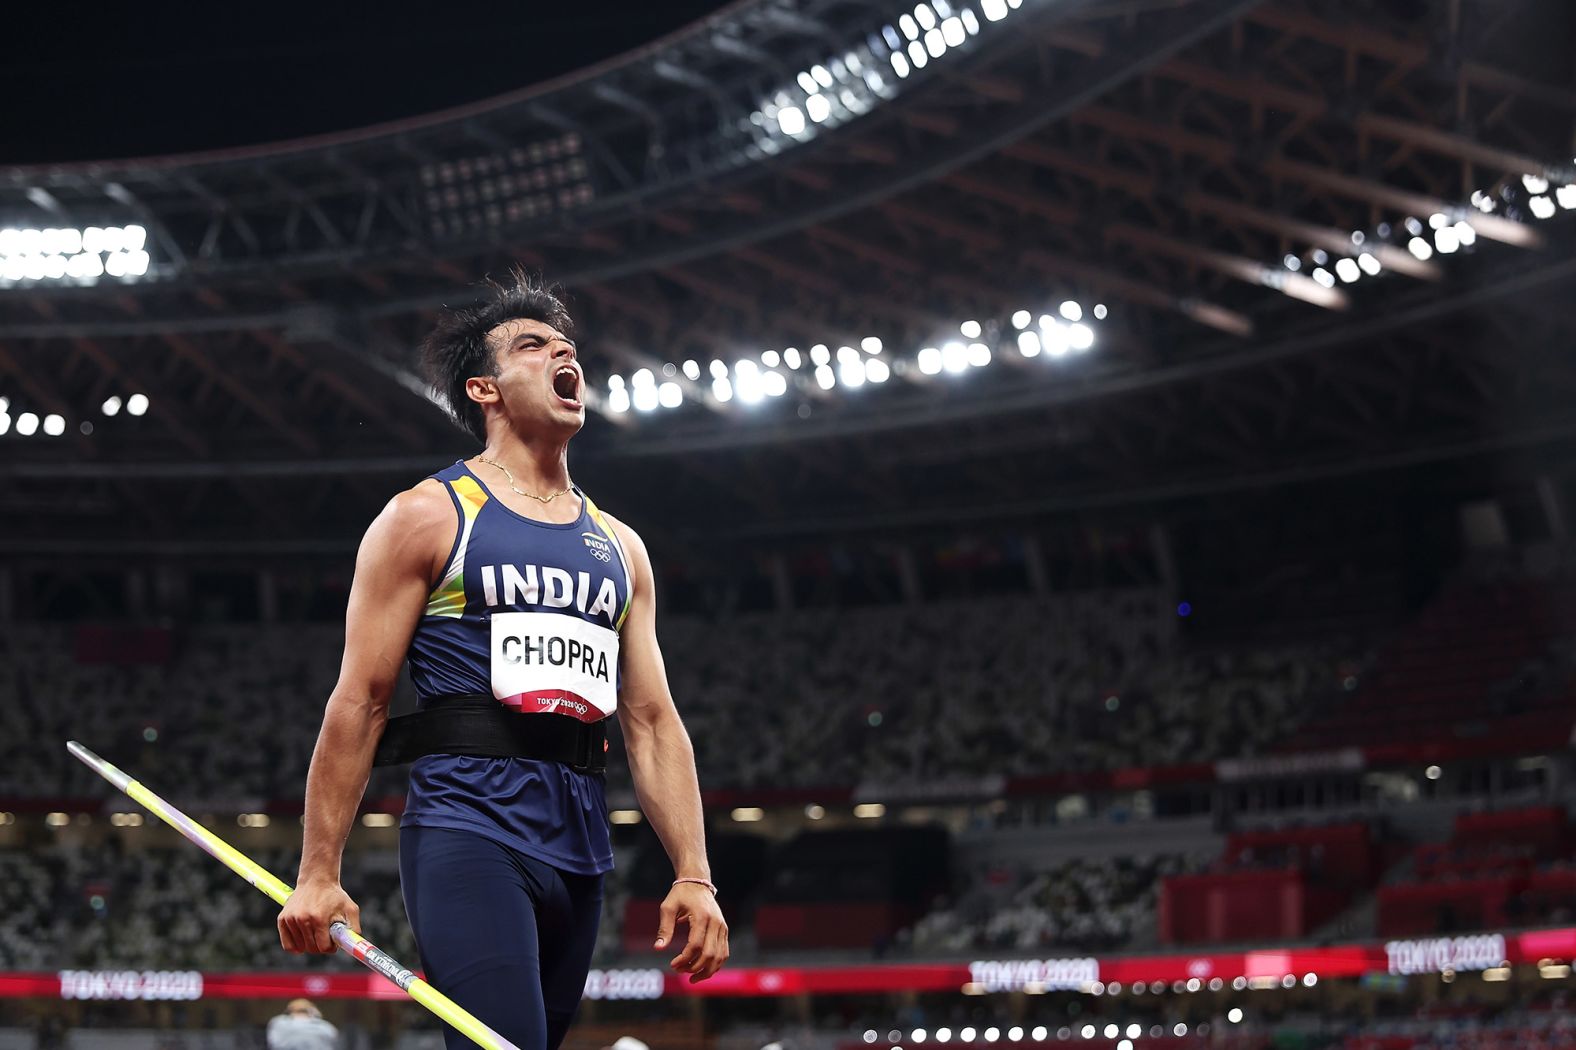 India's Neeraj Chopra won the javelin on August 7, becoming <a href="index.php?page=&url=https%3A%2F%2Fwww.cnn.com%2F2021%2F08%2F07%2Fsport%2Fneeraj-chopra-india-olympics-javelin-spt-intl%2Findex.html" target="_blank">the first Indian athlete to win an Olympic gold medal in track and field.</a>